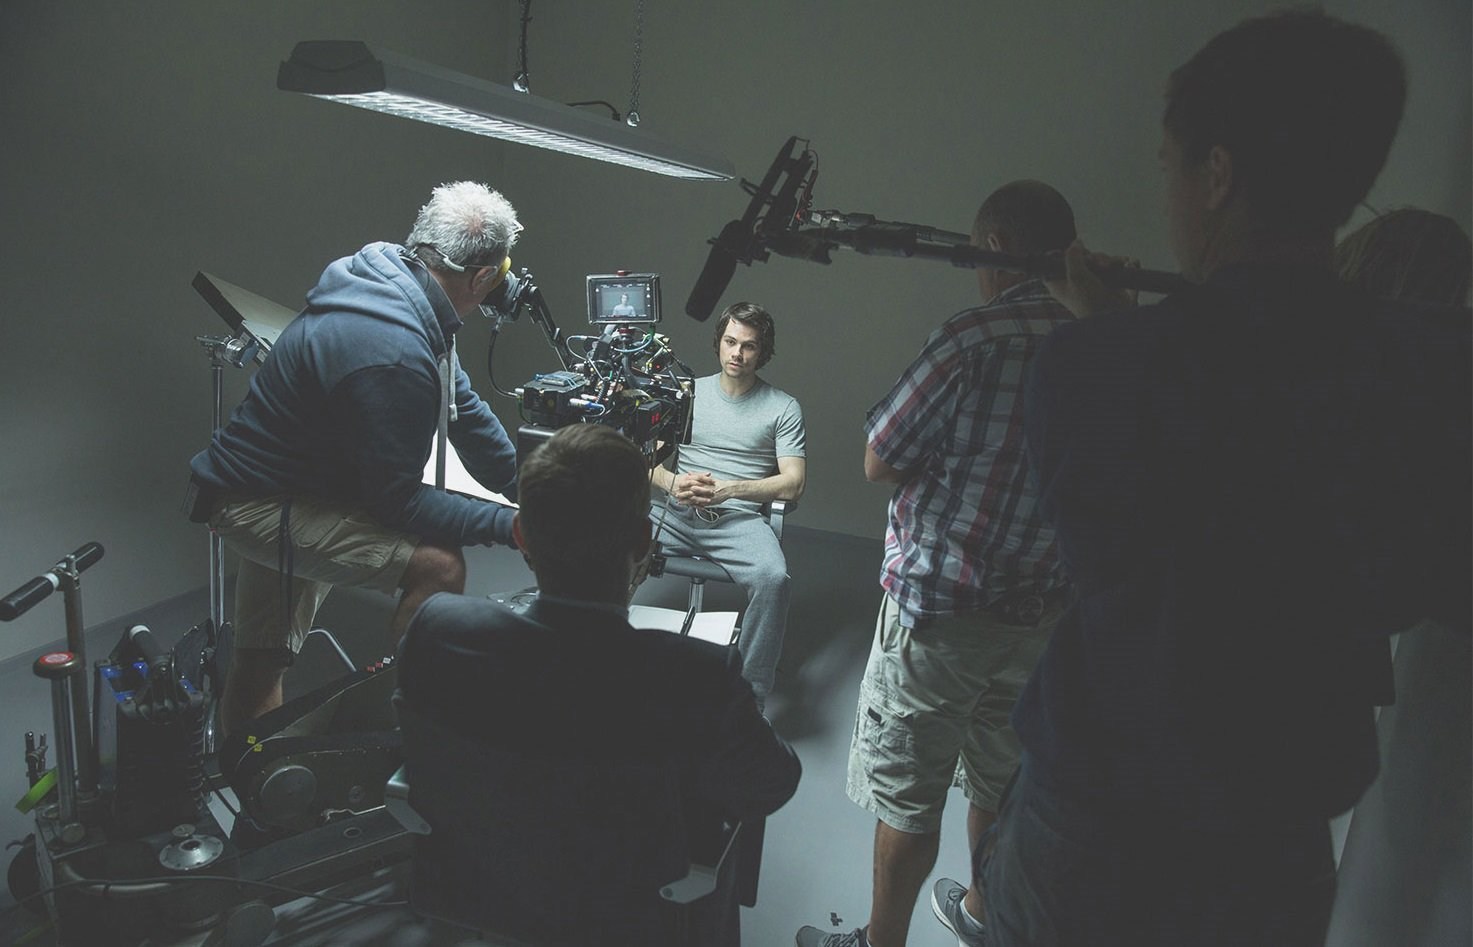 Filming American Assassin (2019) Behind the Scenes